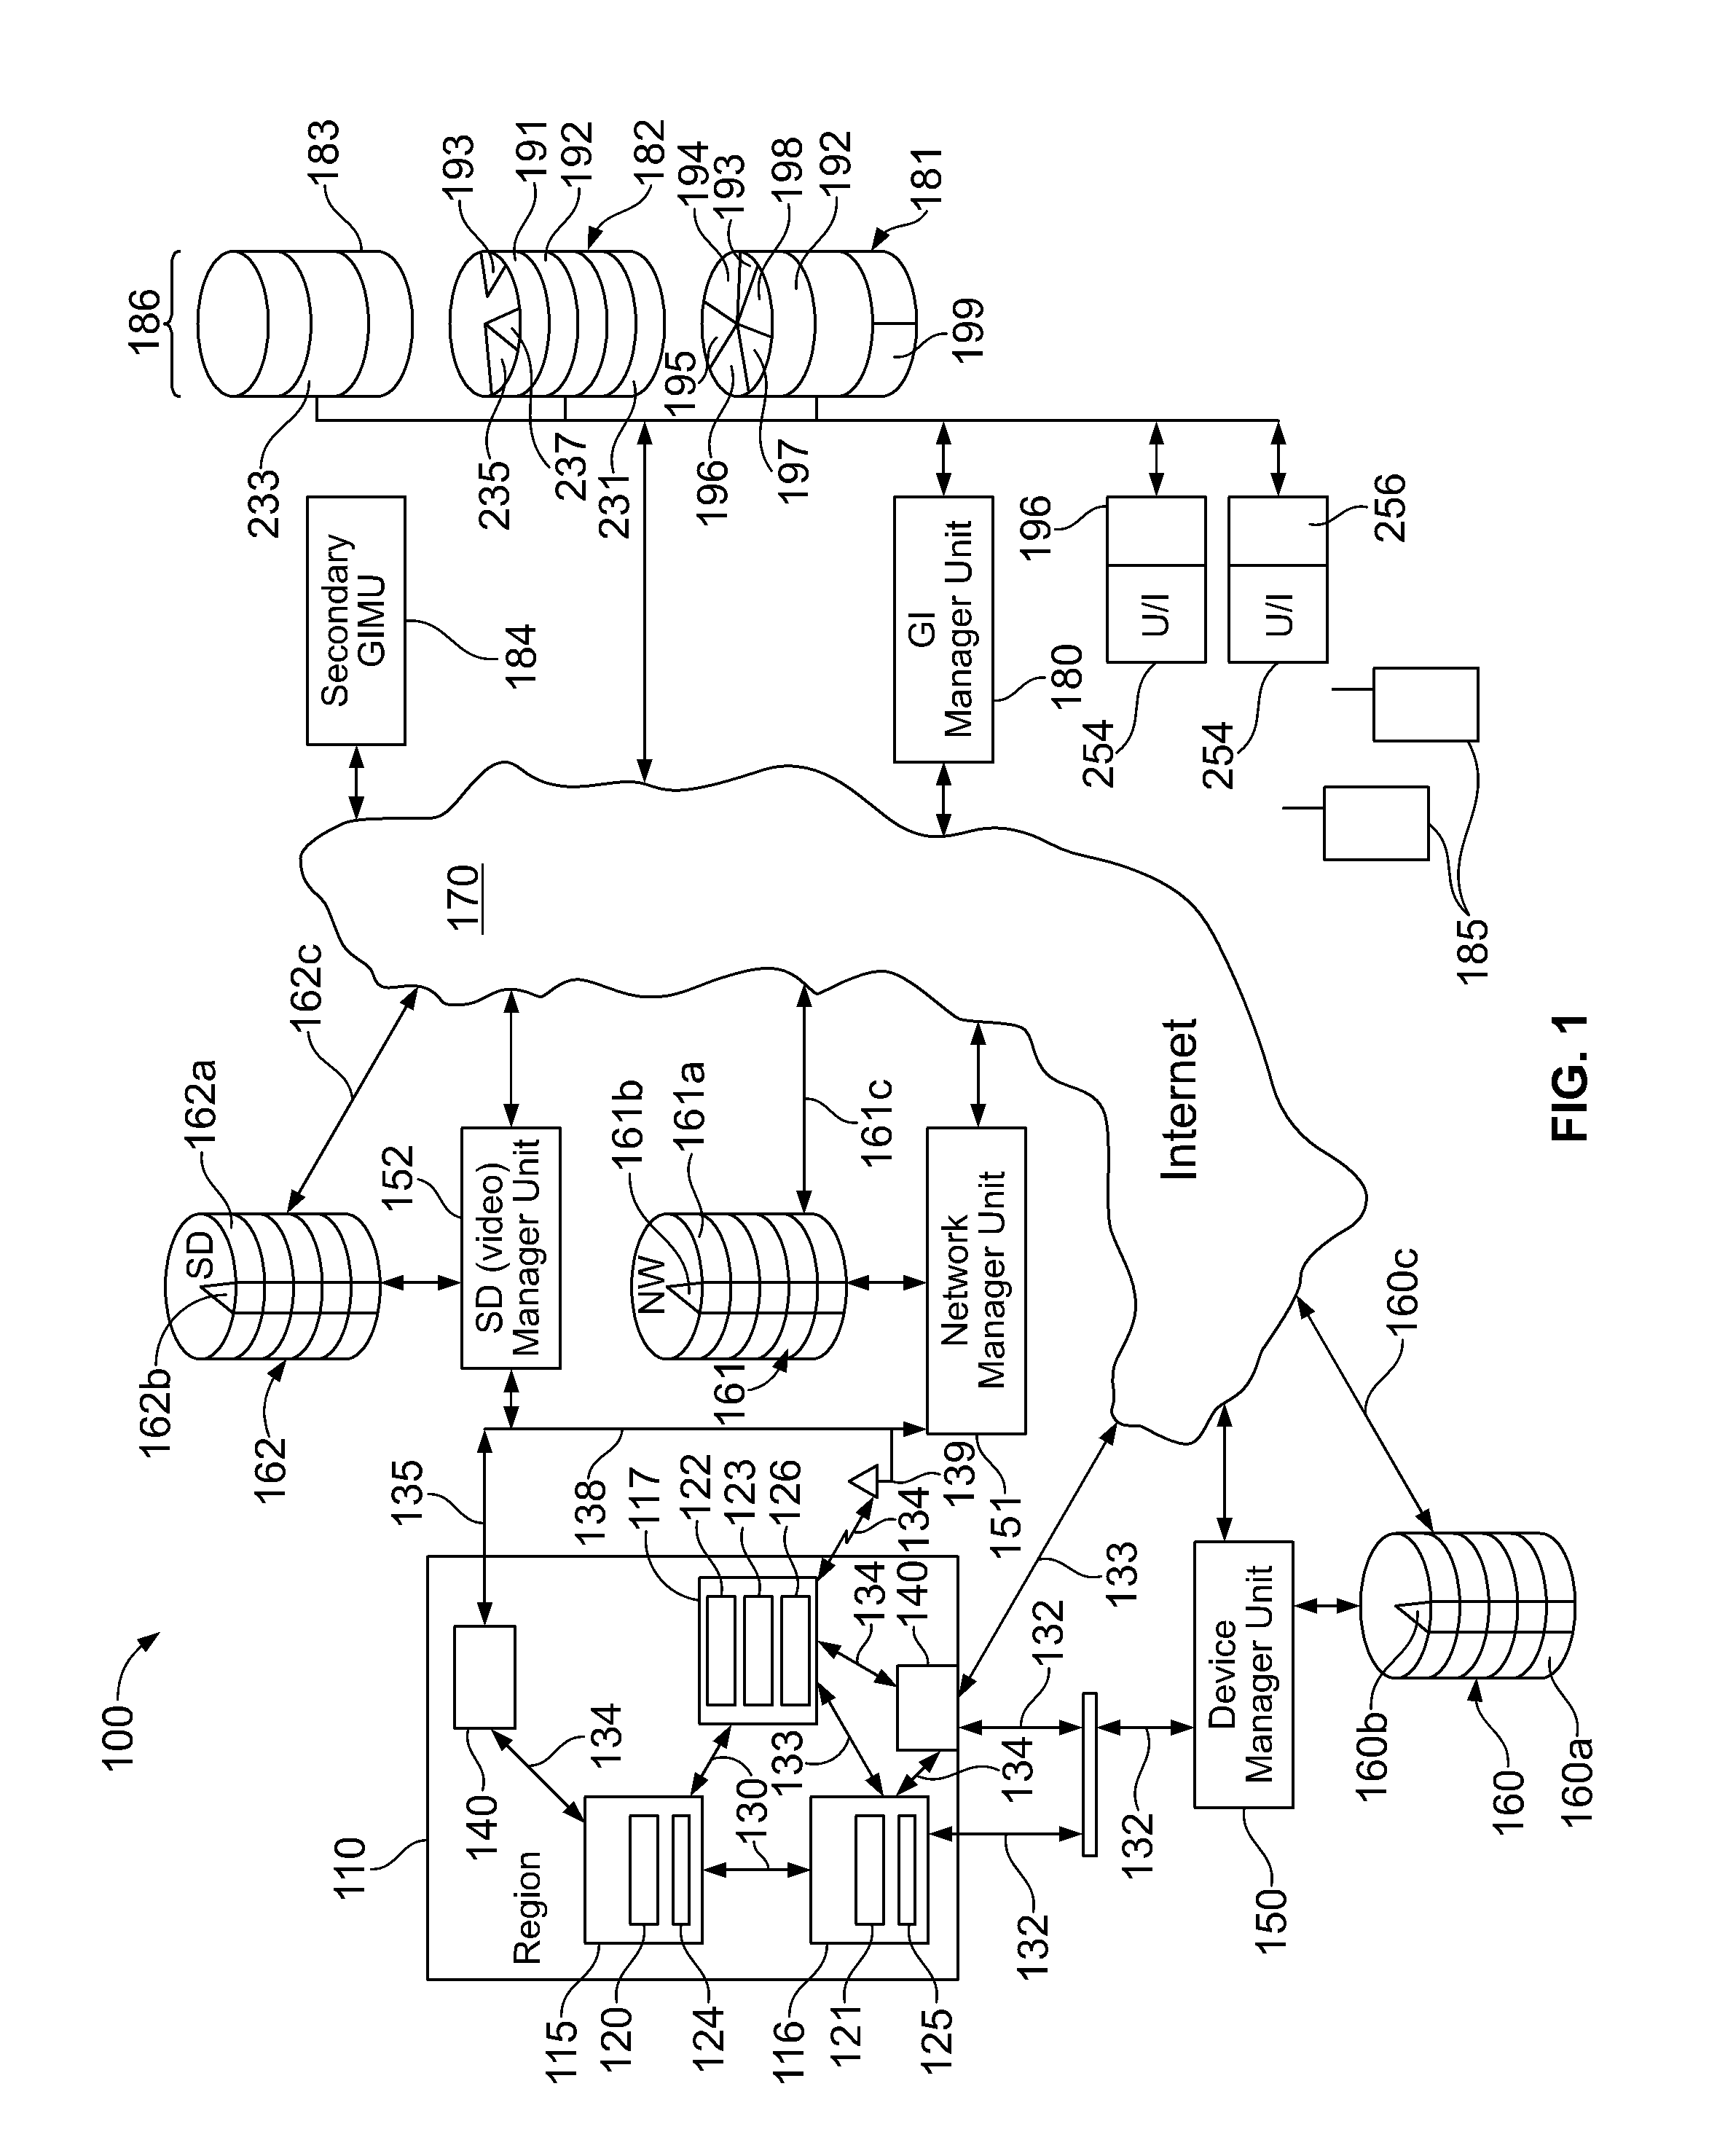 Method and database to provide a security technology and management portal